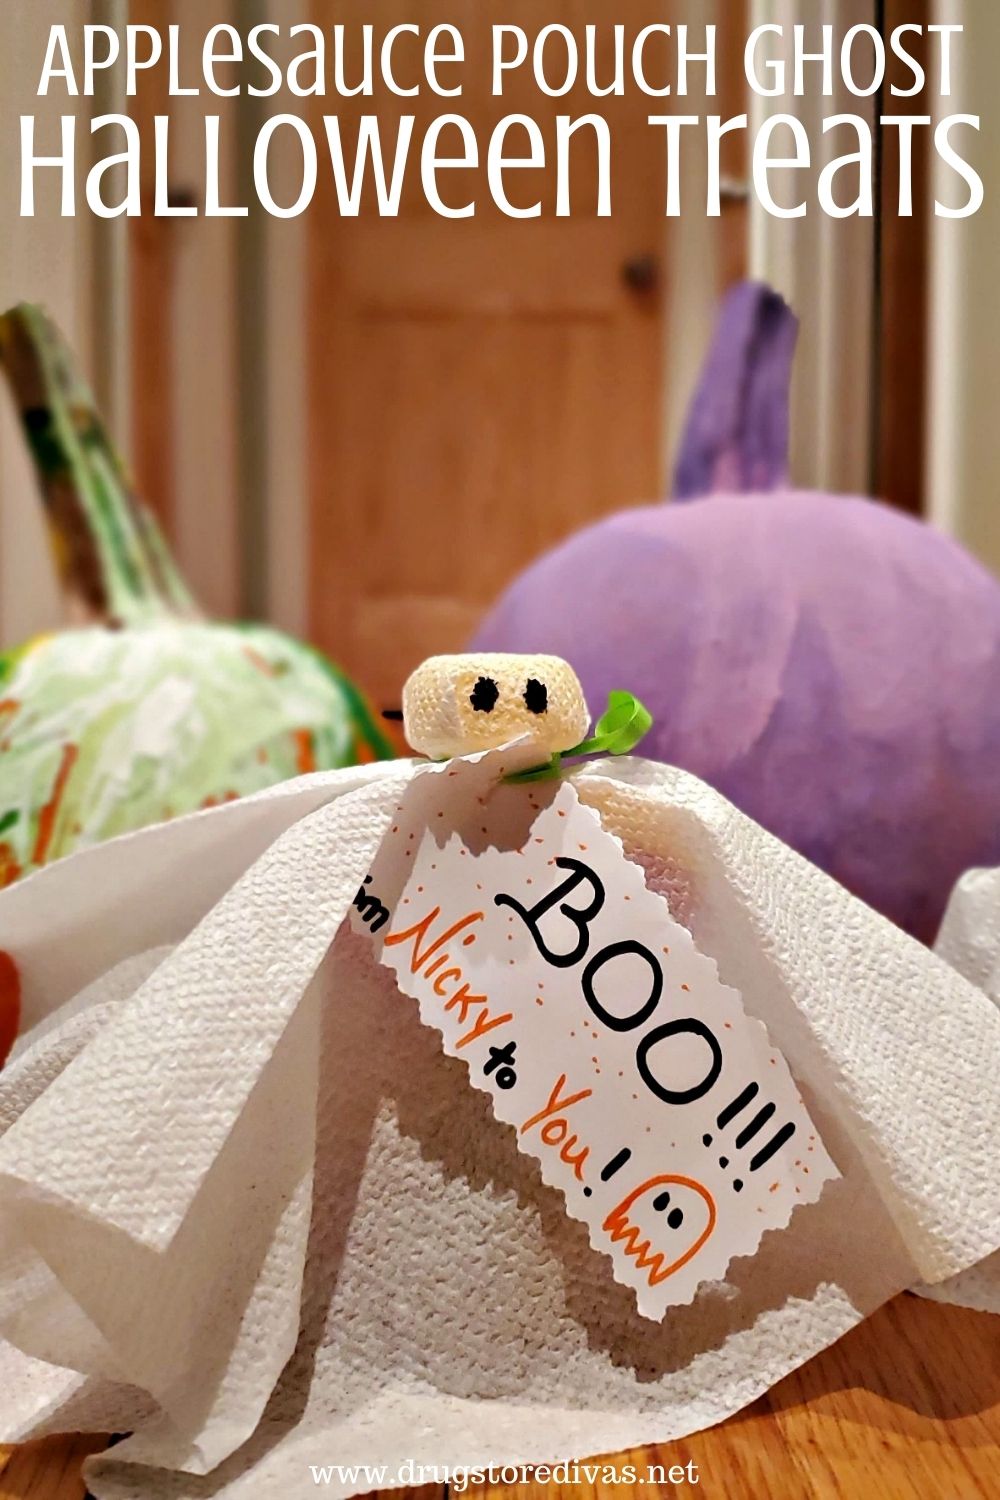 A napkin ghost in front of a green and a purple pumpkin with the words "Applesauce Pouch Ghost Halloween Treats" digitally written on top.